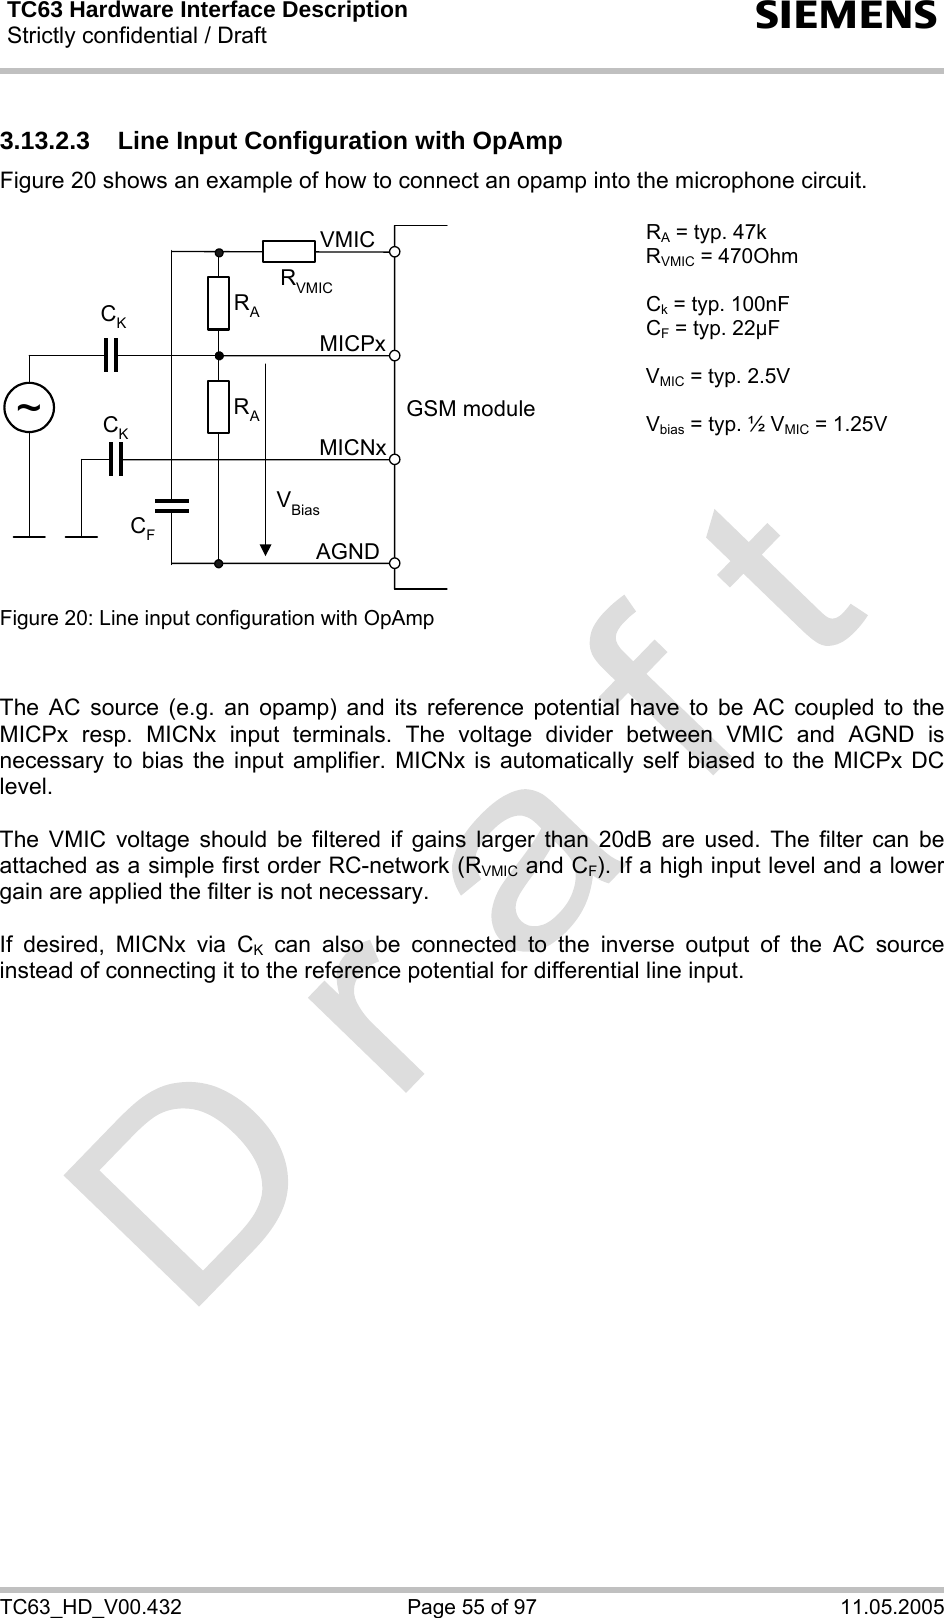 TC63 Hardware Interface Description Strictly confidential / Draft  s TC63_HD_V00.432  Page 55 of 97  11.05.2005 3.13.2.3  Line Input Configuration with OpAmp Figure 20 shows an example of how to connect an opamp into the microphone circuit.  GSM moduleRAVBiasCKAGNDMICNxMICPxVMICRACK~RVMICCF RA = typ. 47k RVMIC = 470Ohm  Ck = typ. 100nF CF = typ. 22µF  VMIC = typ. 2.5V  Vbias = typ. ½ VMIC = 1.25V Figure 20: Line input configuration with OpAmp     The AC source (e.g. an opamp) and its reference potential have to be AC coupled to the MICPx resp. MICNx input terminals. The voltage divider between VMIC and AGND is necessary to bias the input amplifier. MICNx is automatically self biased to the MICPx DC level.   The VMIC voltage should be filtered if gains larger than 20dB are used. The filter can be attached as a simple first order RC-network (RVMIC and CF). If a high input level and a lower gain are applied the filter is not necessary.  If desired, MICNx via CK can also be connected to the inverse output of the AC source instead of connecting it to the reference potential for differential line input.    